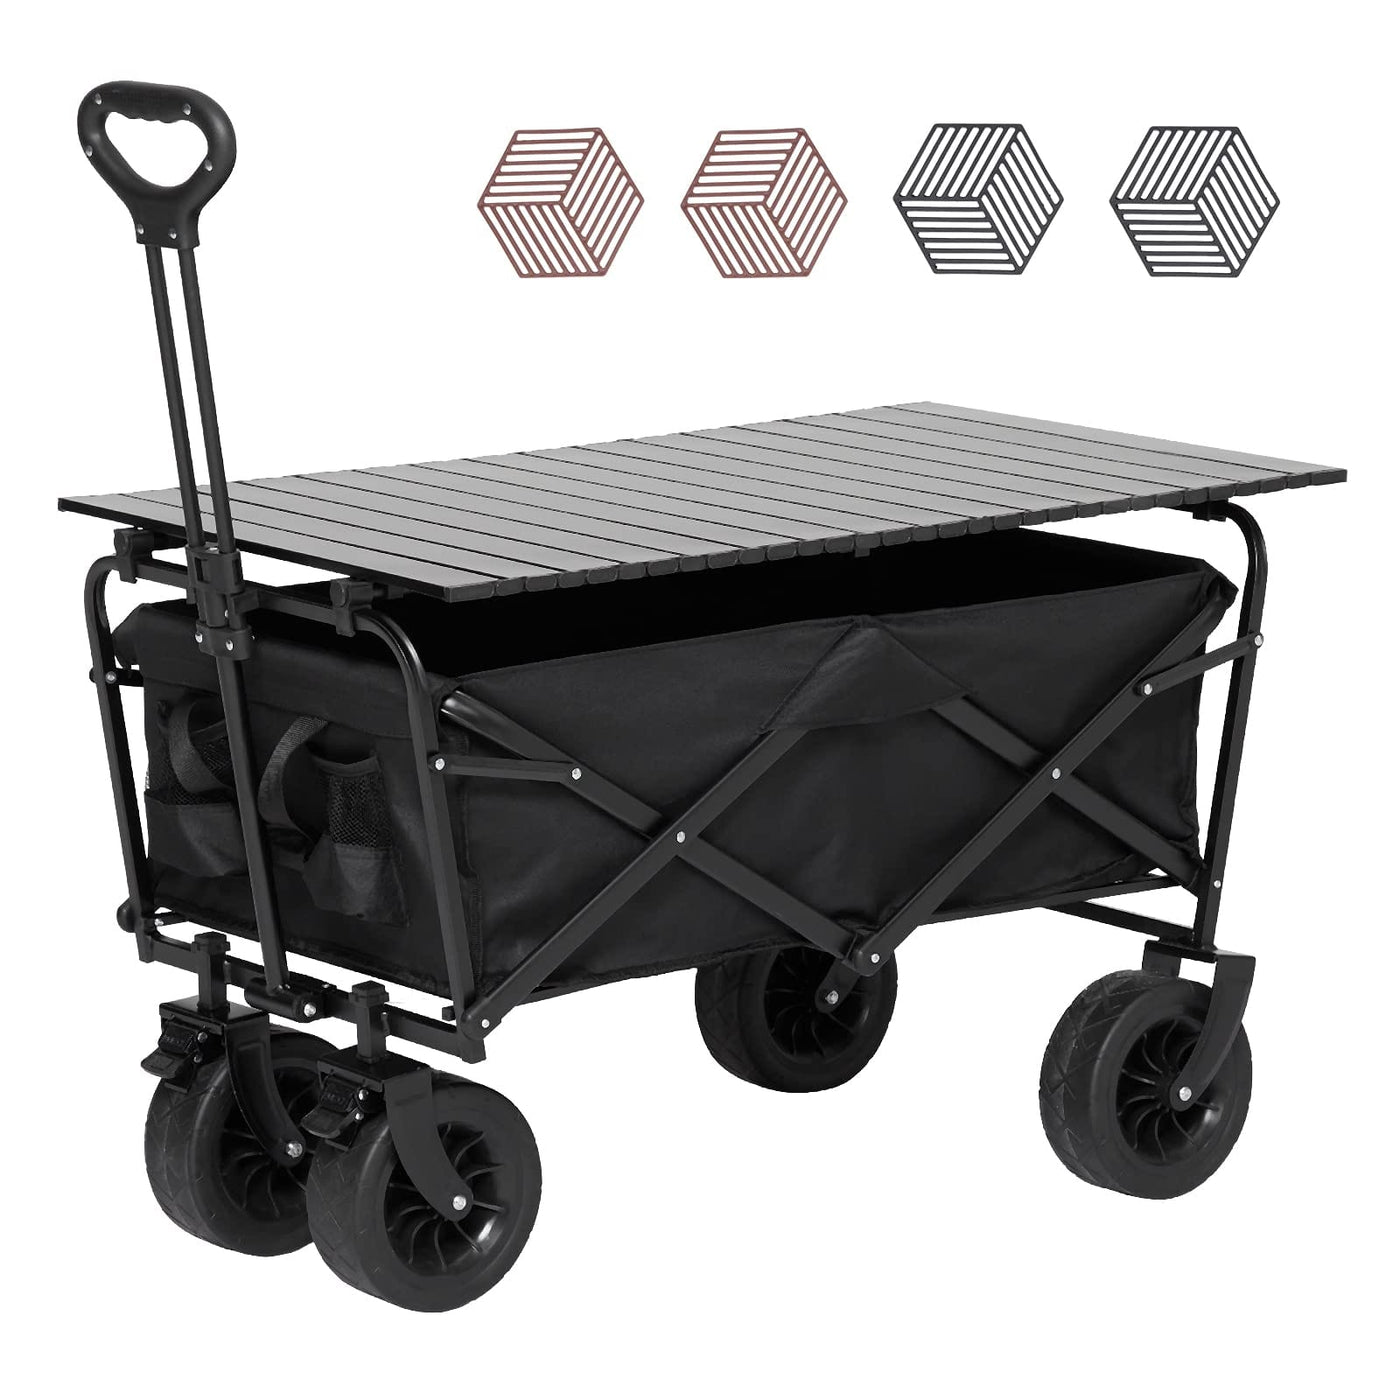 GARVEE 8 inch All Terrain Wheels Collapsible Outdoor Camping Wagon with Brakes